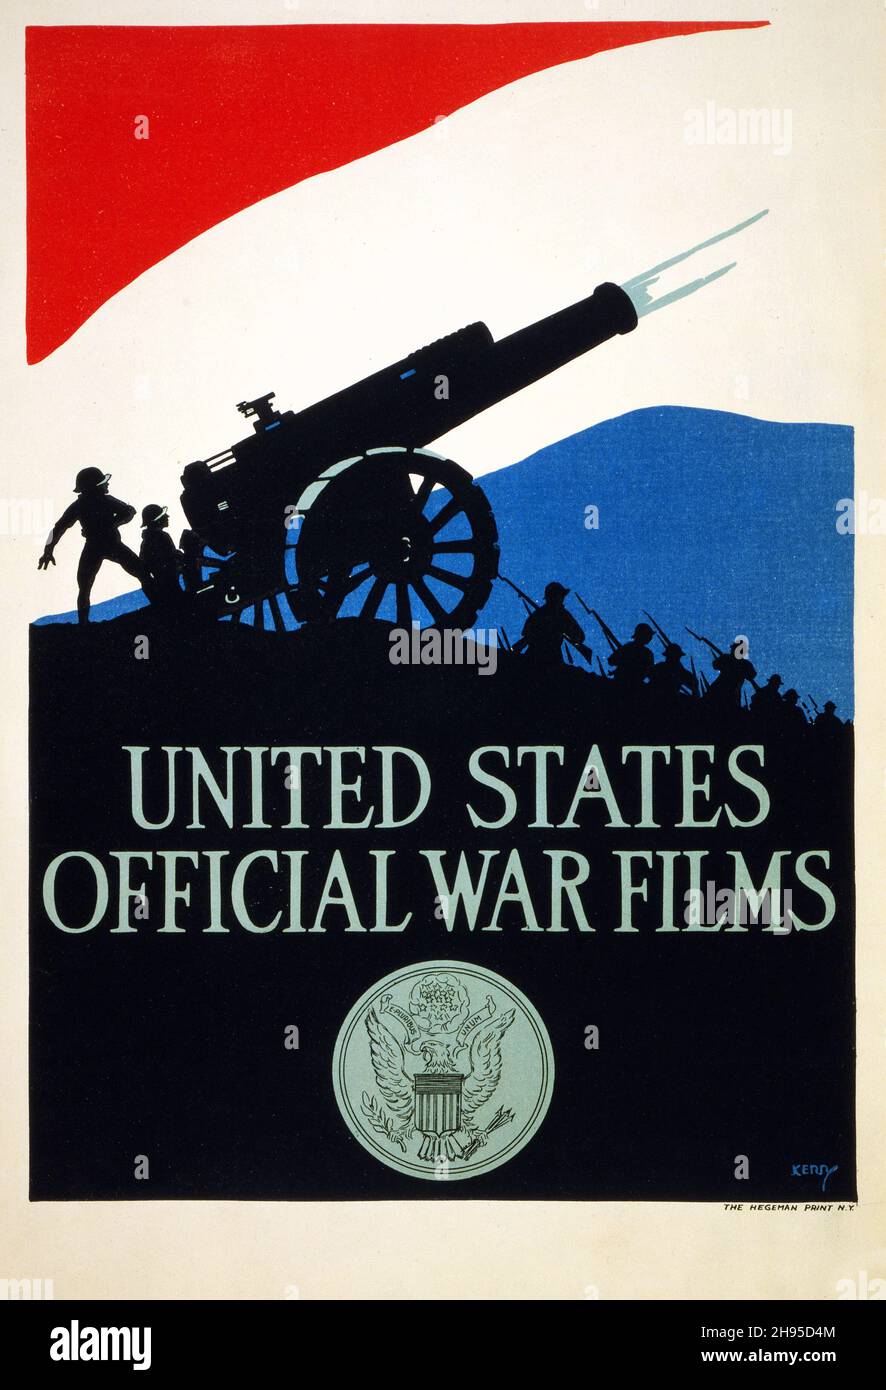 United States official war films, 1917. Stock Photo